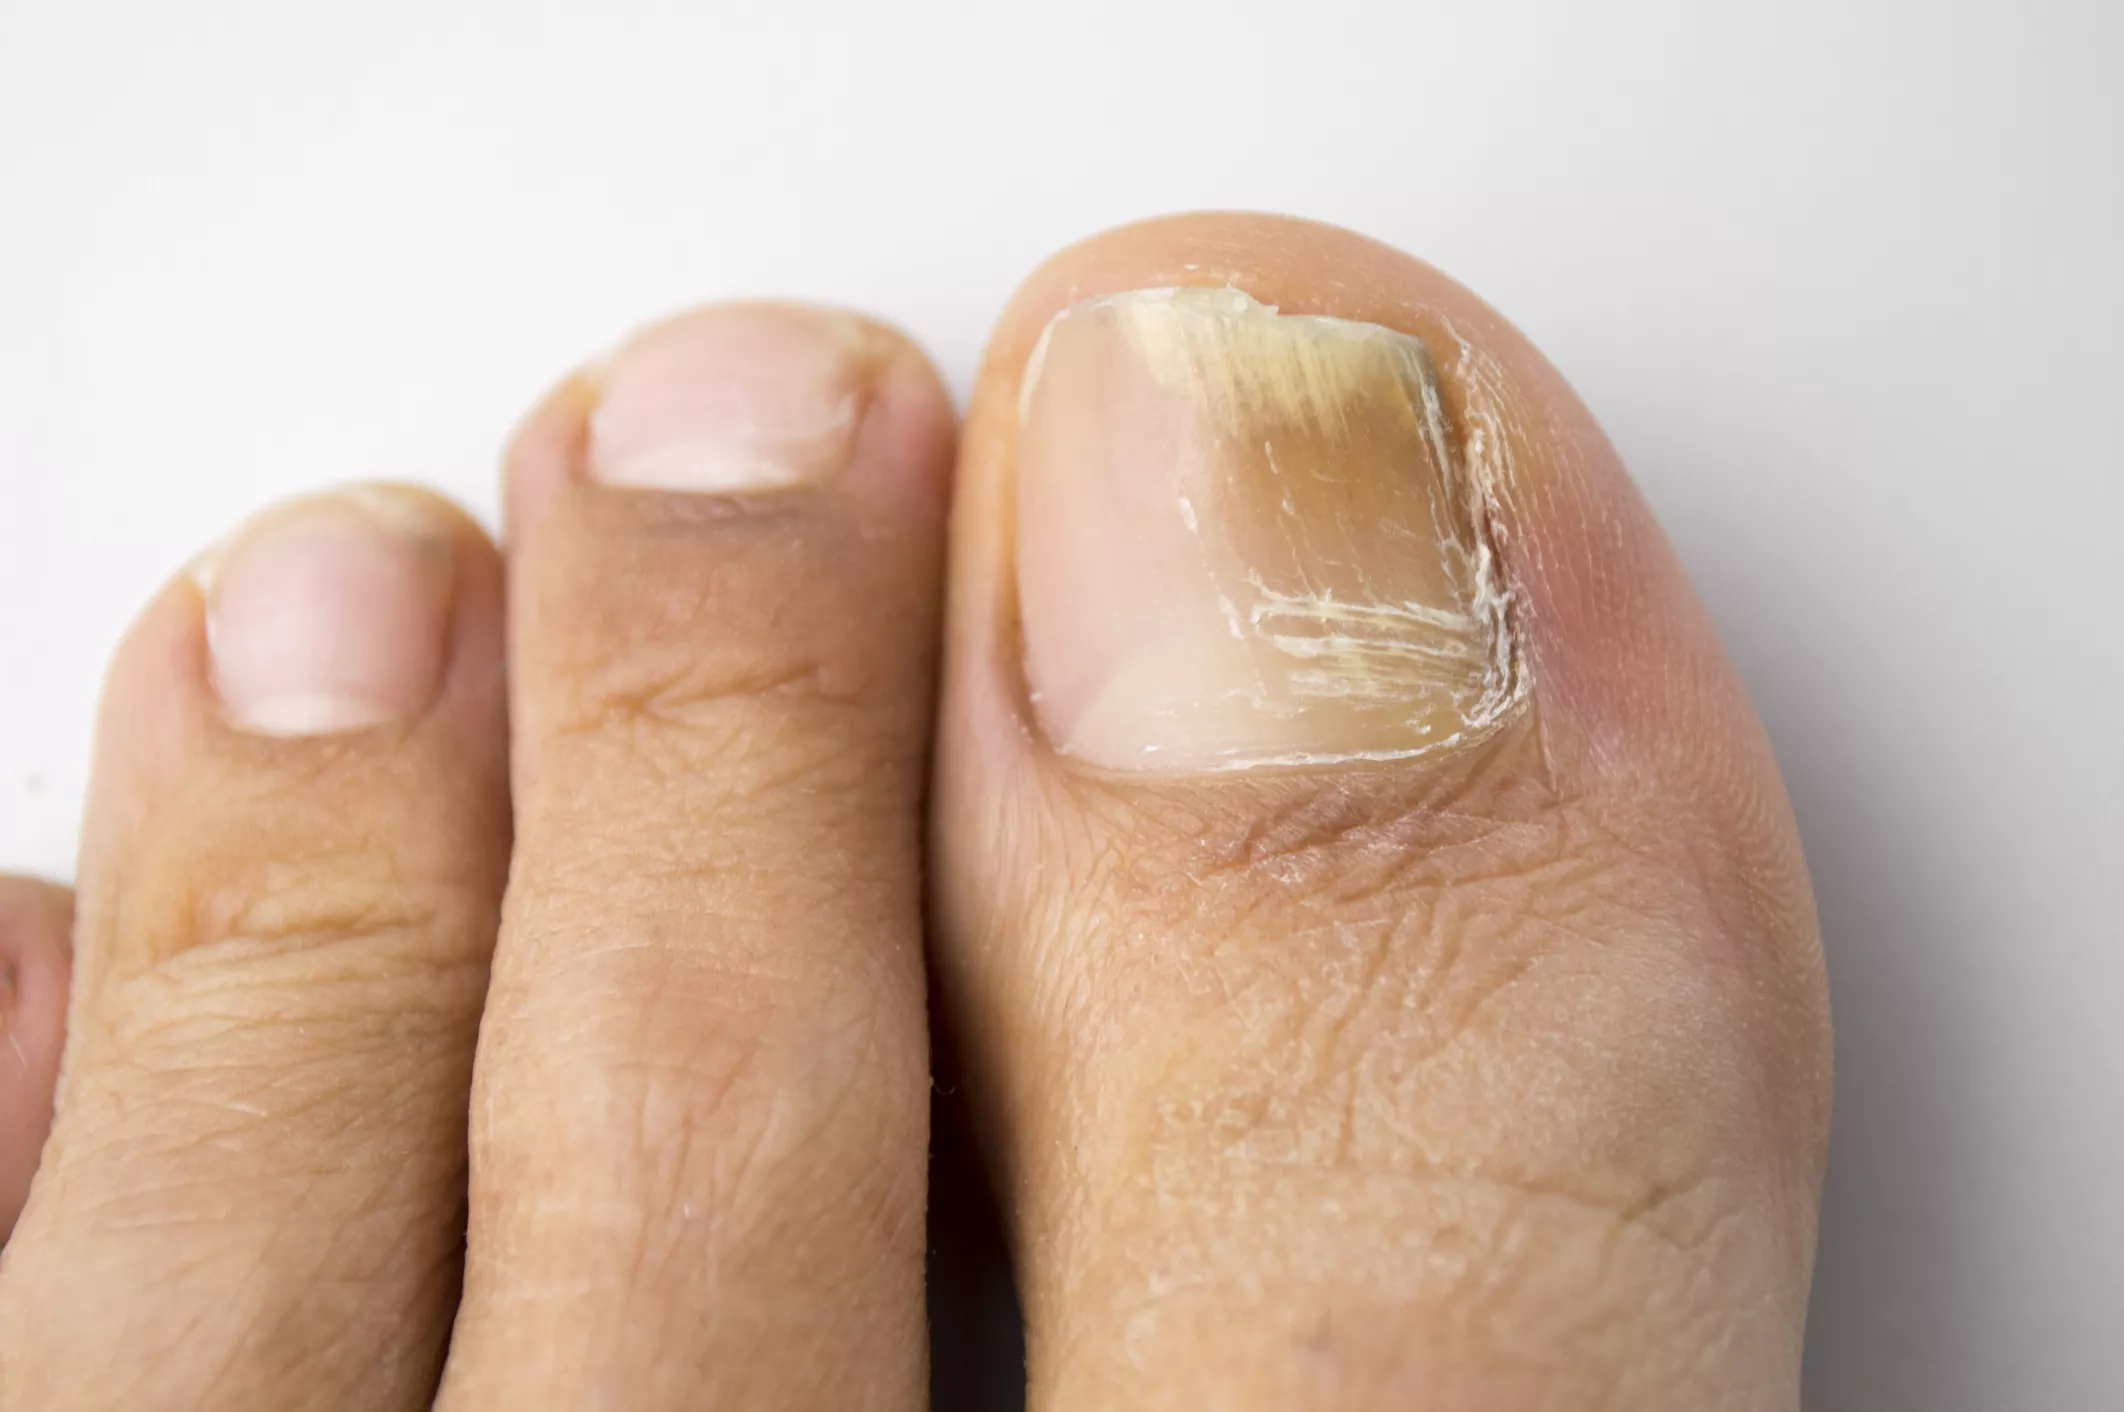 Nail fungus affects one or more nails.